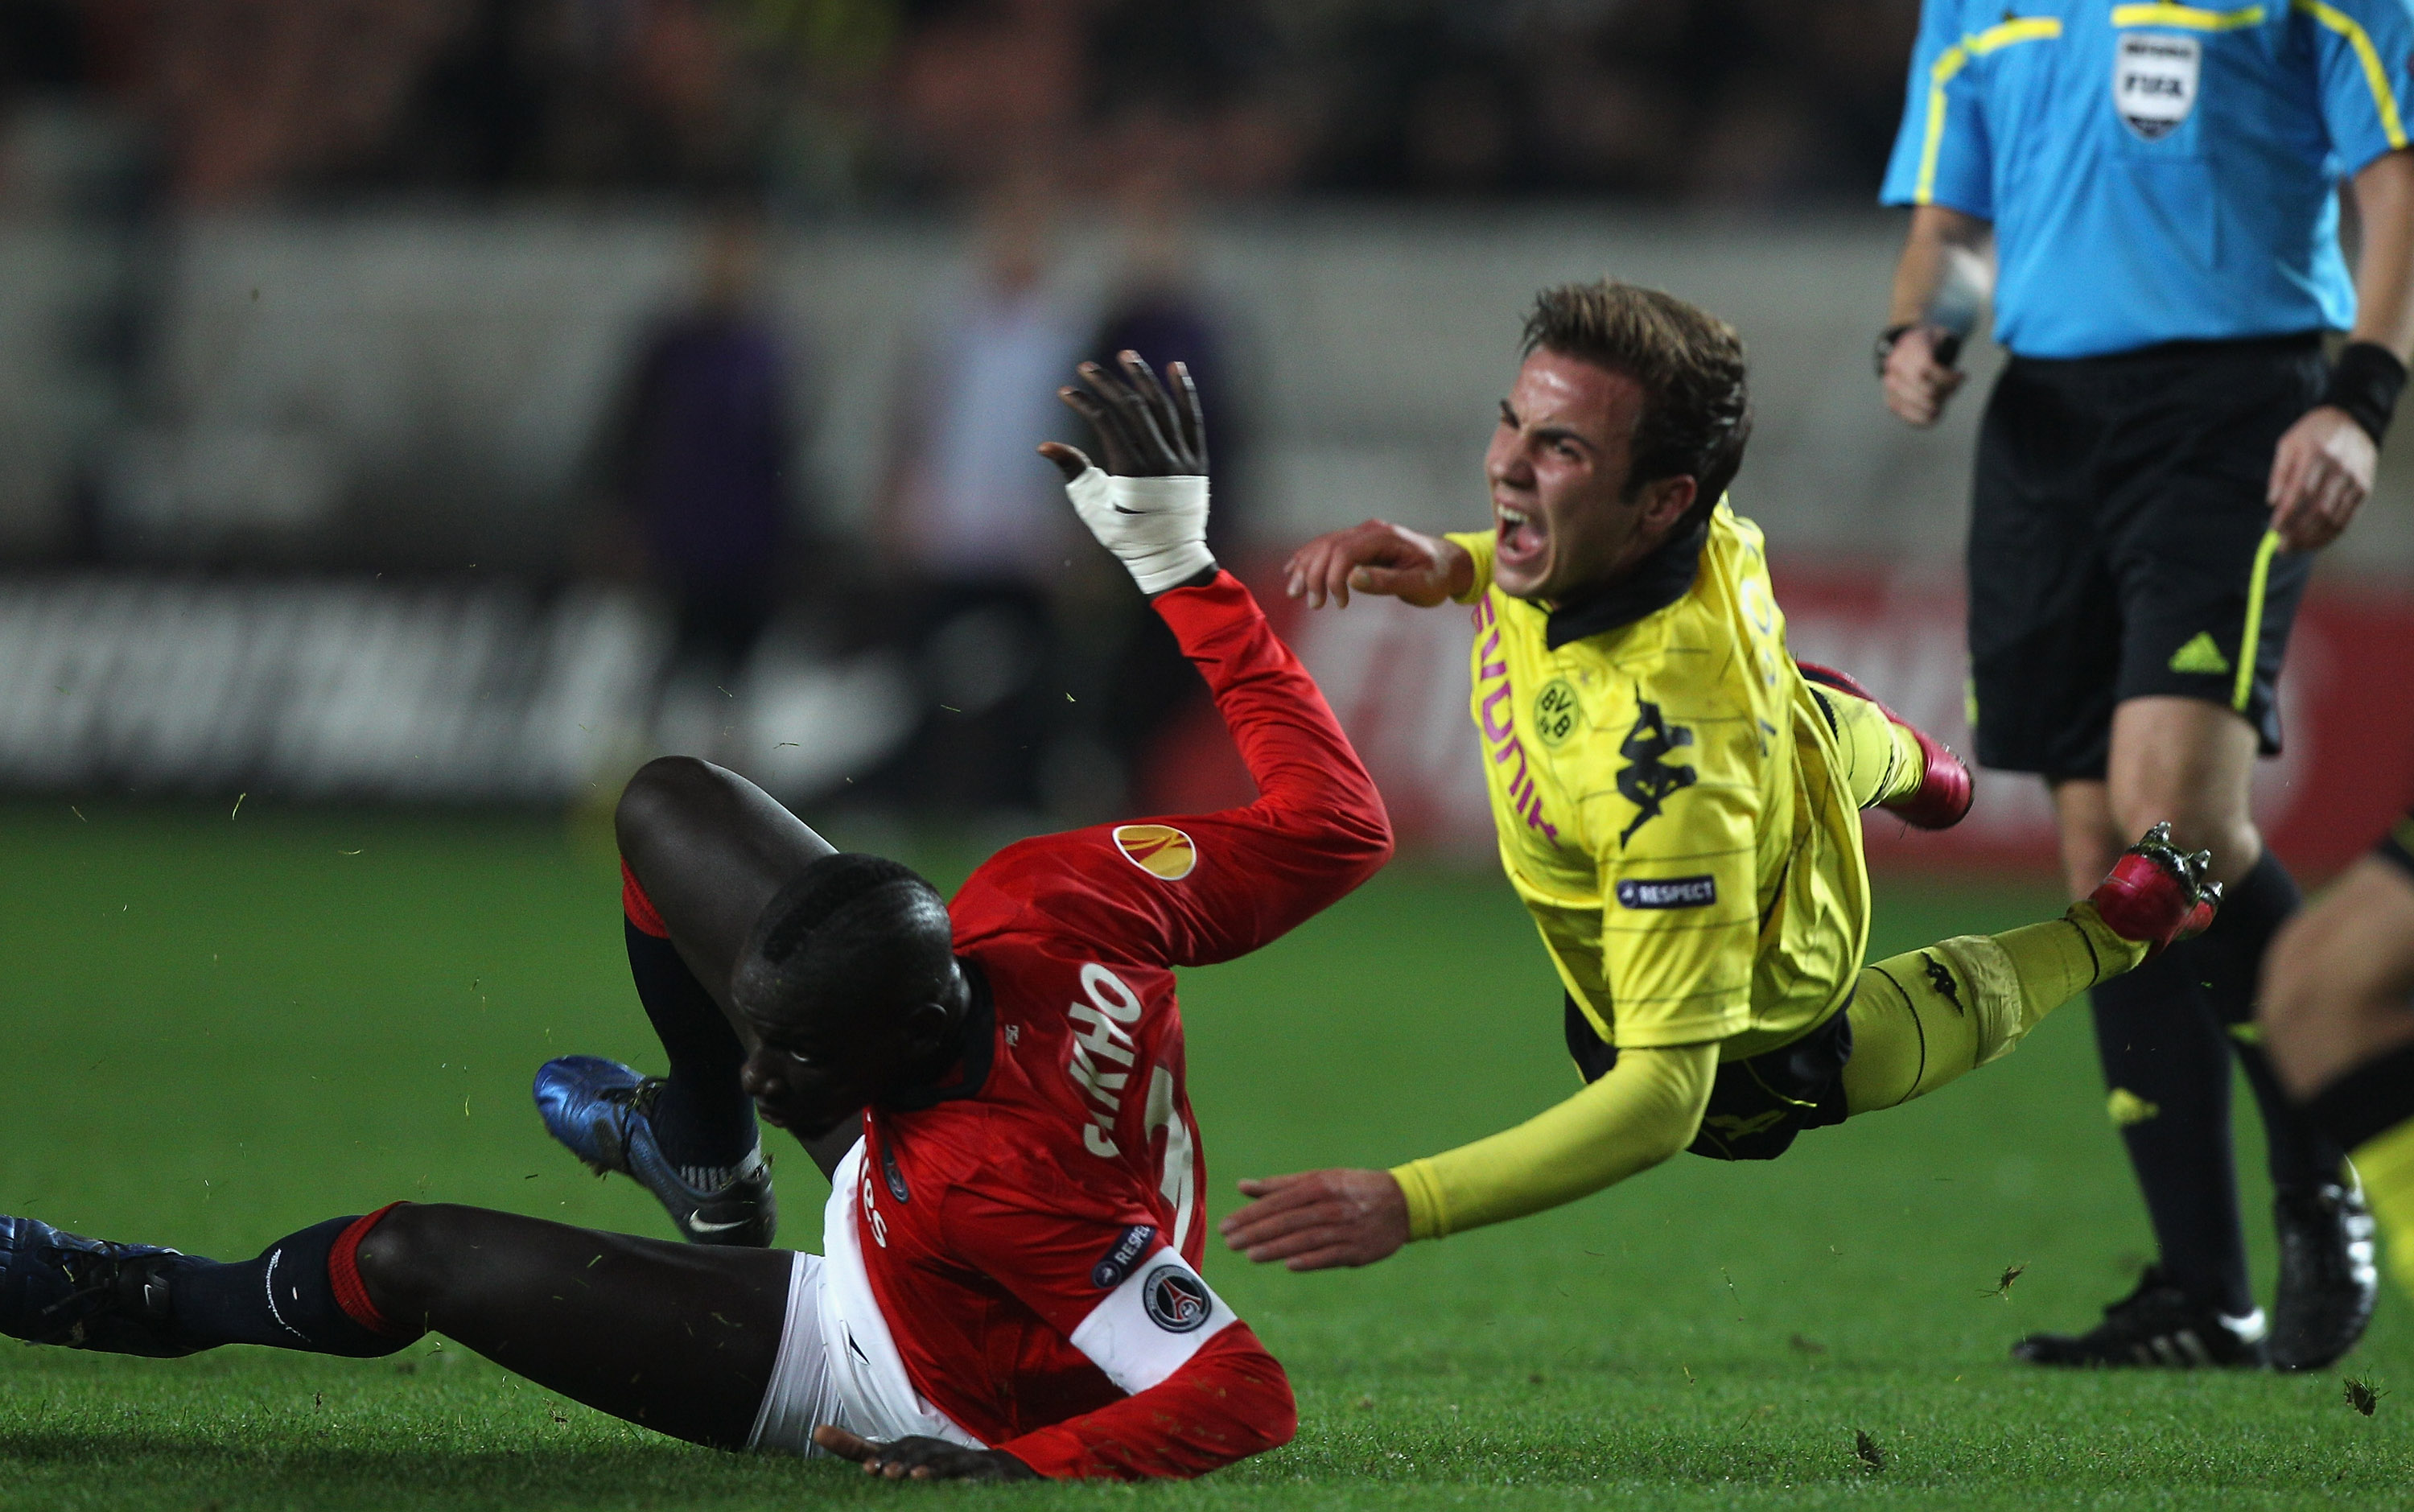 PARIS - NOVEMBER 04: Mario Gotze (r) of Borussia is fouled by Mamadou Sakho during the UEFA Europa League Group J match between Paris Saint Germain and Borussia Dortmund at the Parc des Princes on November 4, 2010 in Paris, France.  (Photo by Michael Stee